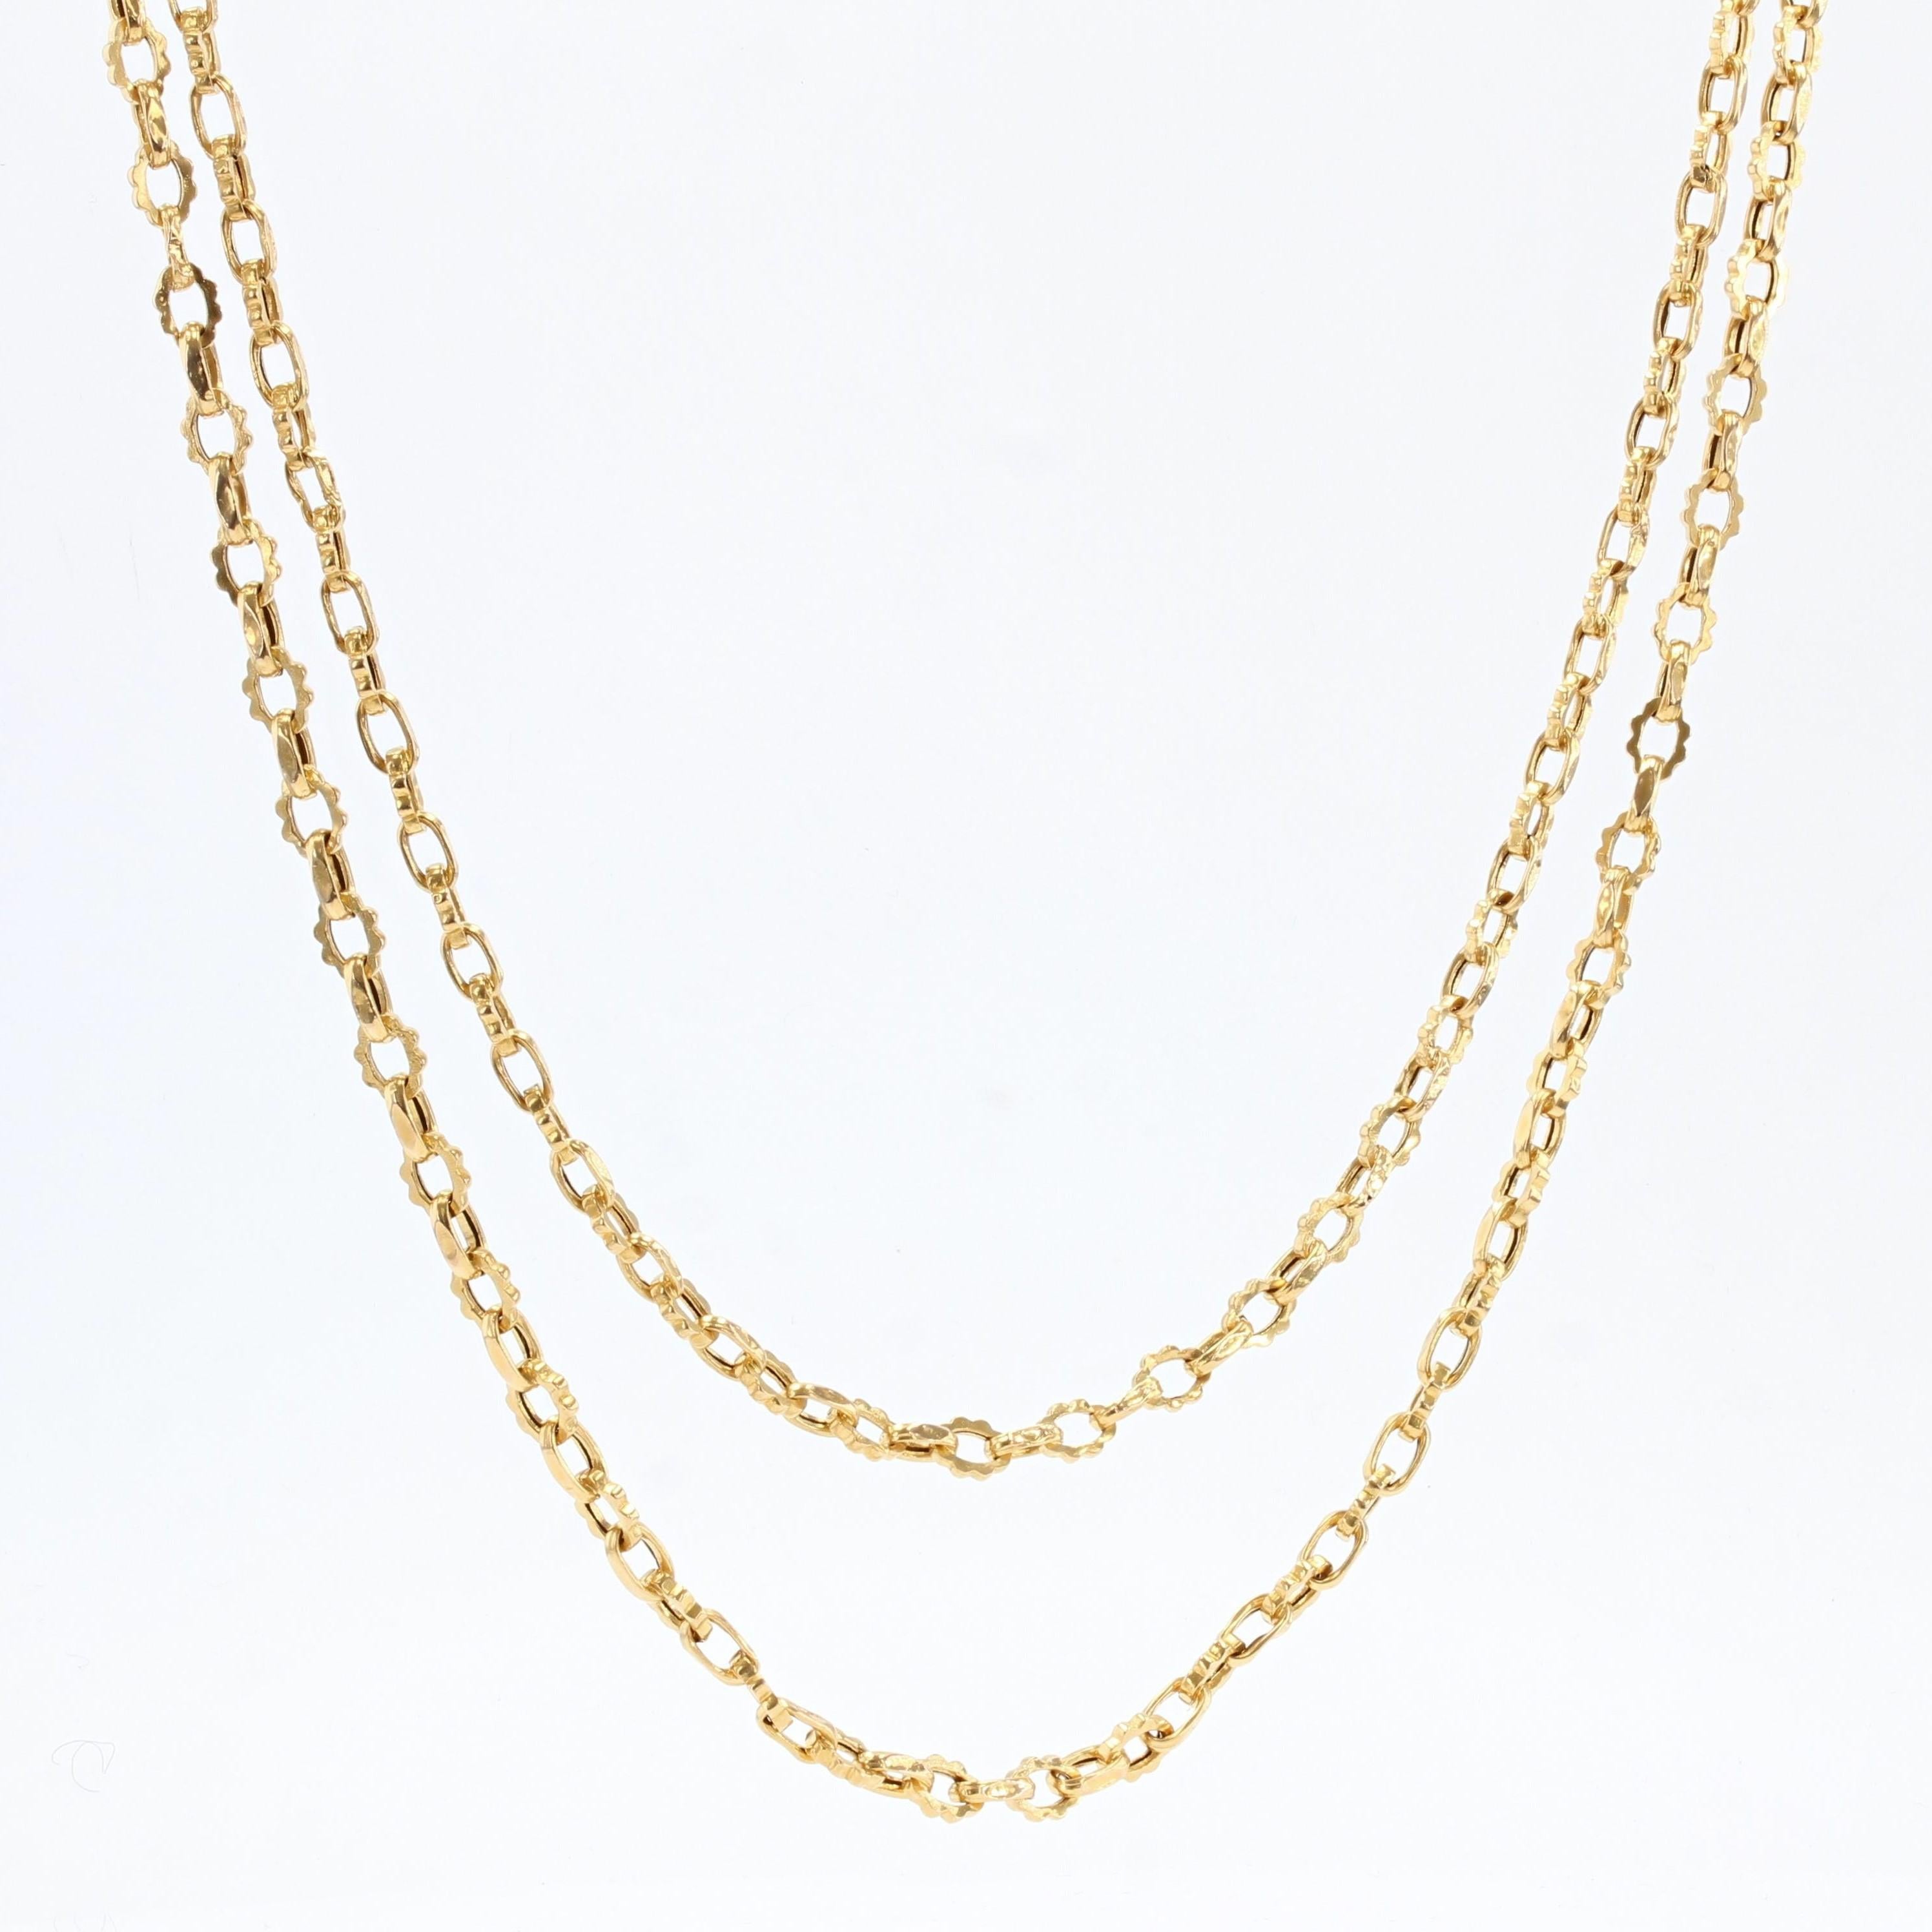 French 1830s 18 Karat Yellow Gold Chiseled Mesh Long Necklace For Sale 6